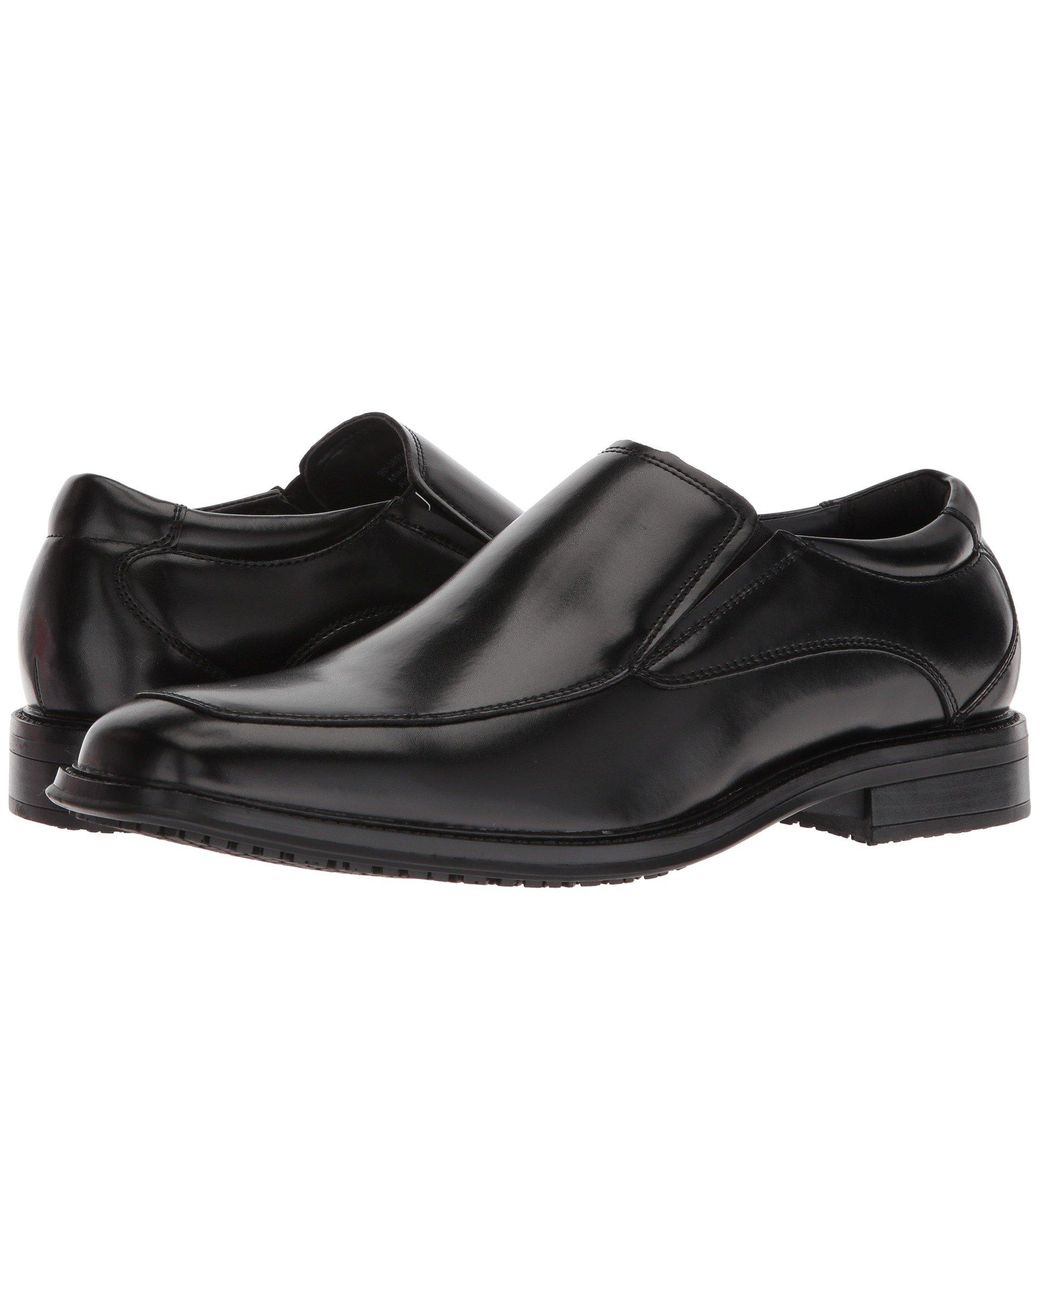 Dockers Leather Lawton Shoes in Black for Men - Lyst